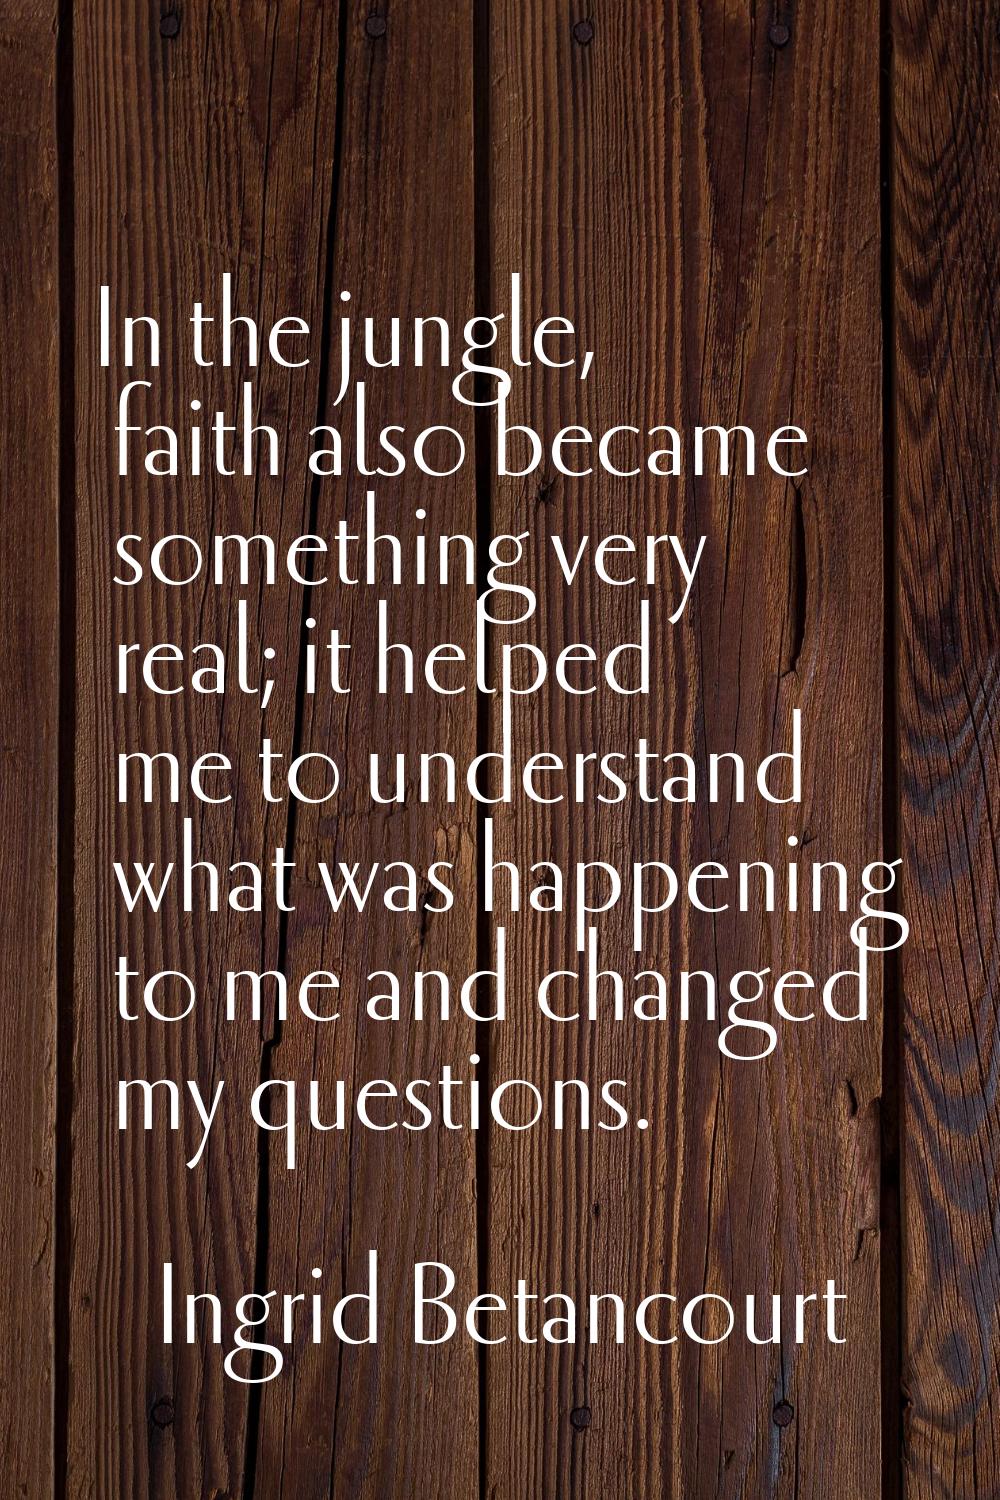 In the jungle, faith also became something very real; it helped me to understand what was happening